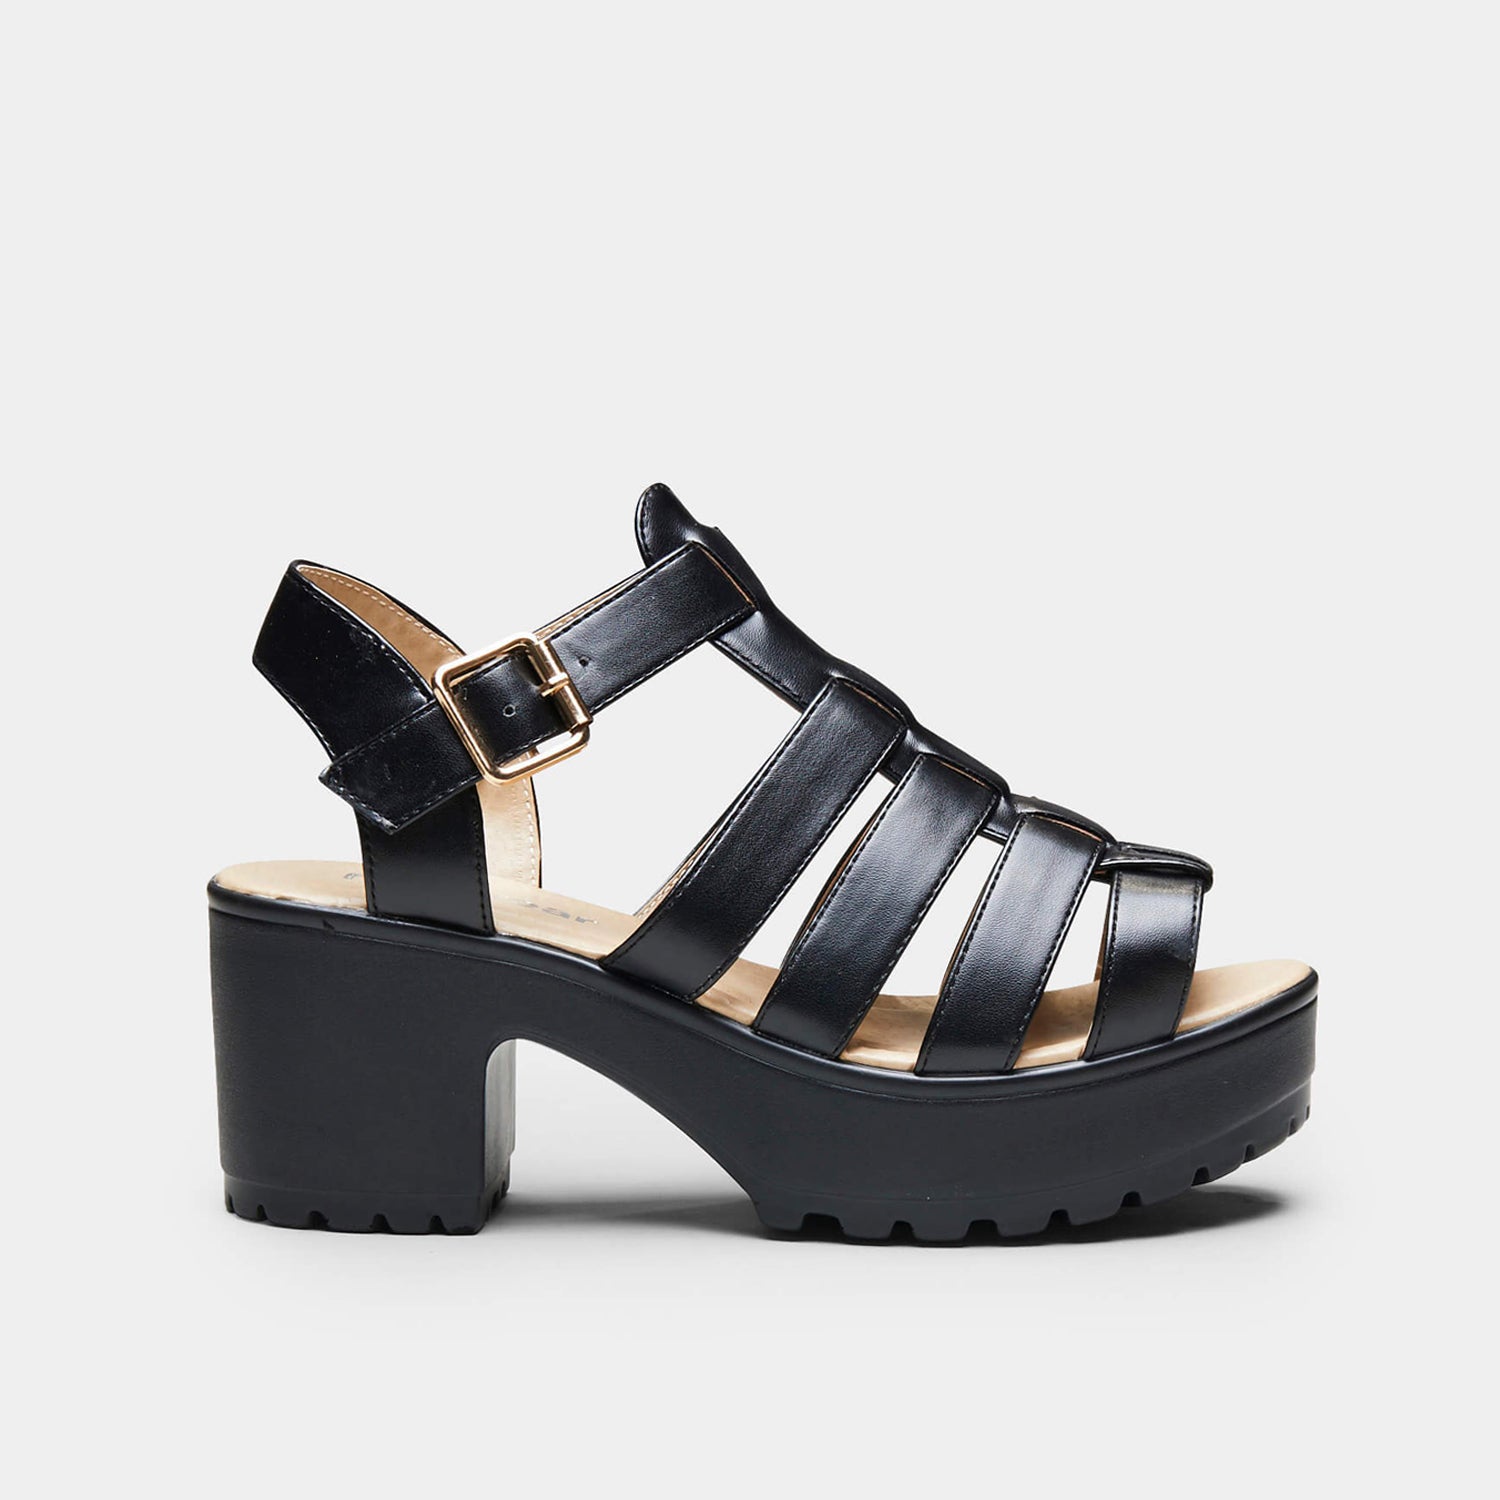 SII Black Strappy Cleated Sandals - Sandals - KOI Footwear - Black - Side View